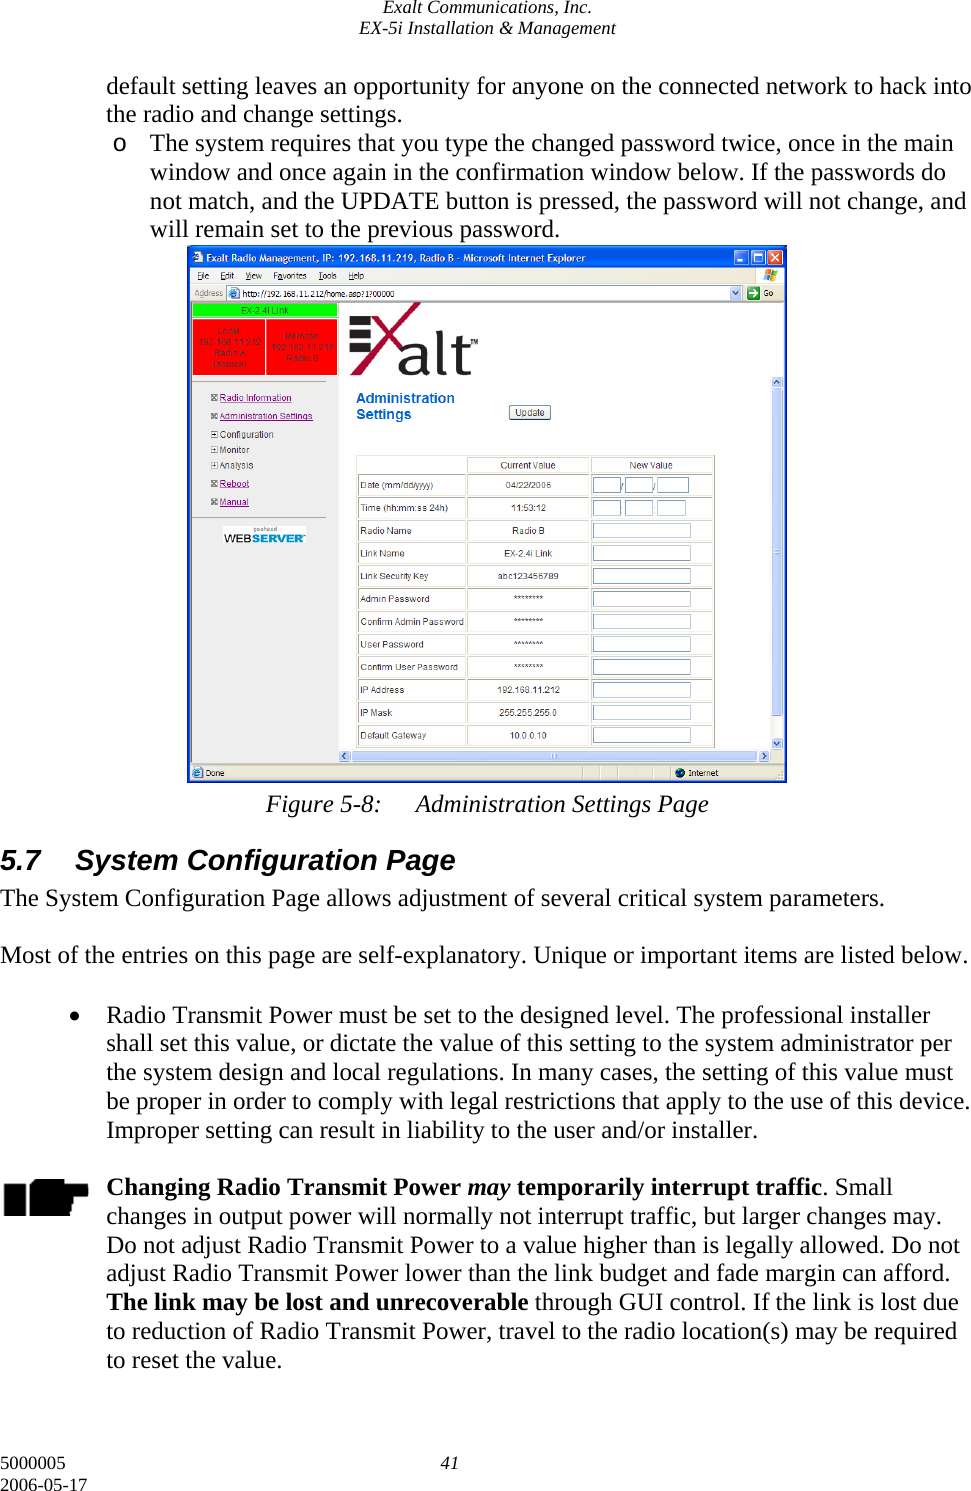 Exalt Communications, Inc. EX-5i Installation &amp; Management 5000005  41 2006-05-17 default setting leaves an opportunity for anyone on the connected network to hack into the radio and change settings. o The system requires that you type the changed password twice, once in the main window and once again in the confirmation window below. If the passwords do not match, and the UPDATE button is pressed, the password will not change, and will remain set to the previous password.                    Figure 5-8:  Administration Settings Page 5.7  System Configuration Page The System Configuration Page allows adjustment of several critical system parameters.   Most of the entries on this page are self-explanatory. Unique or important items are listed below.  • Radio Transmit Power must be set to the designed level. The professional installer shall set this value, or dictate the value of this setting to the system administrator per the system design and local regulations. In many cases, the setting of this value must be proper in order to comply with legal restrictions that apply to the use of this device. Improper setting can result in liability to the user and/or installer.  Changing Radio Transmit Power may temporarily interrupt traffic. Small changes in output power will normally not interrupt traffic, but larger changes may. Do not adjust Radio Transmit Power to a value higher than is legally allowed. Do not adjust Radio Transmit Power lower than the link budget and fade margin can afford. The link may be lost and unrecoverable through GUI control. If the link is lost due to reduction of Radio Transmit Power, travel to the radio location(s) may be required to reset the value.  